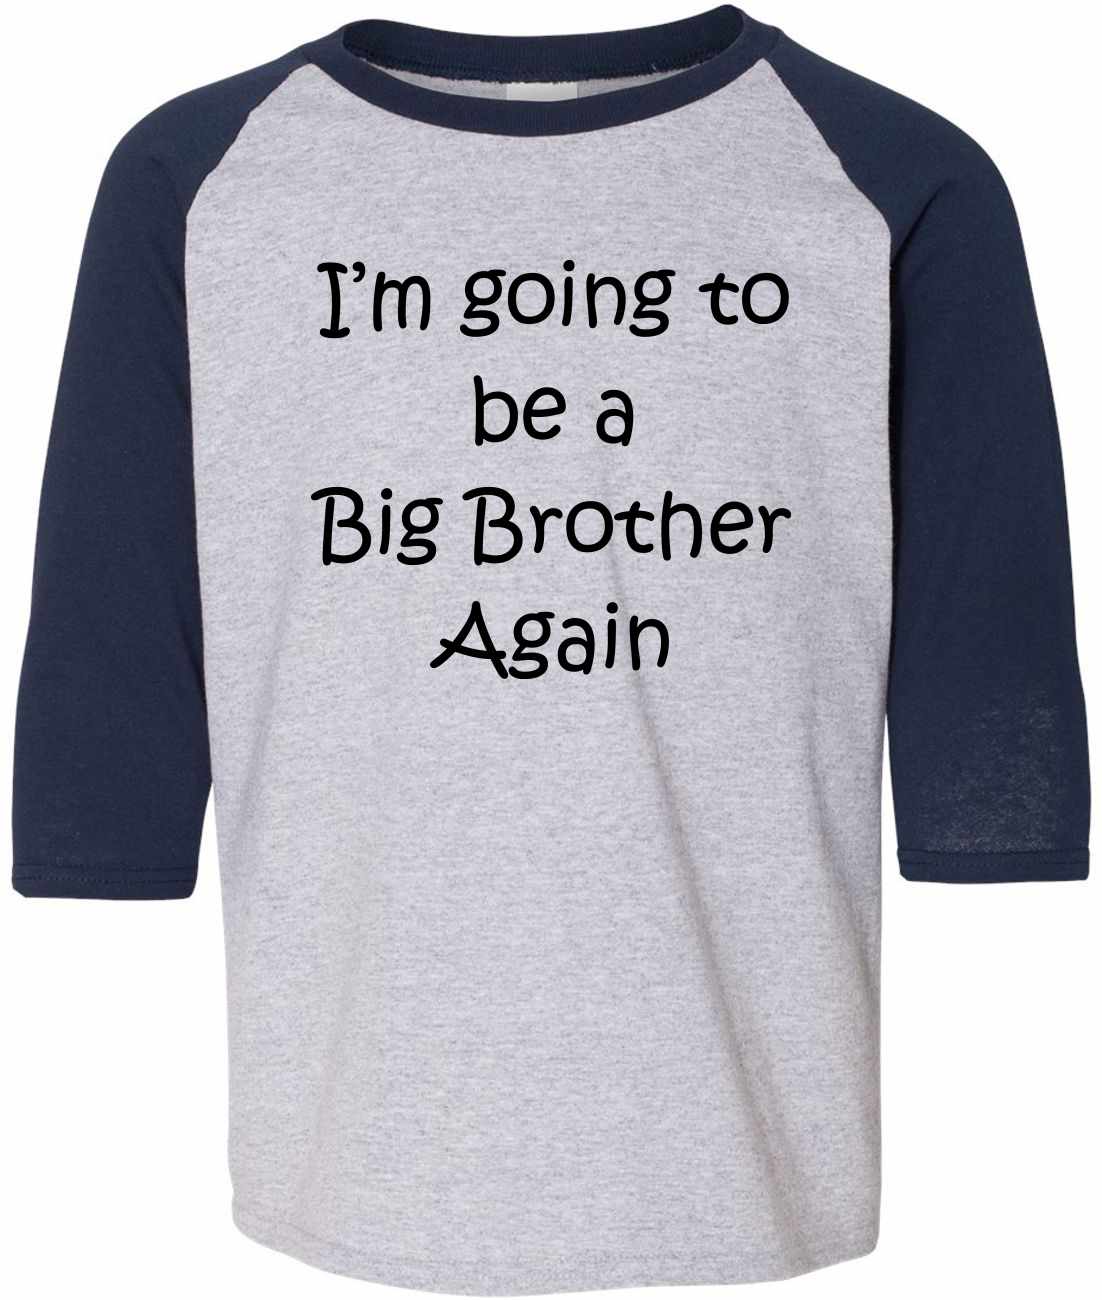 I'm Going to be a Big Brother Again on Youth Baseball Shirt